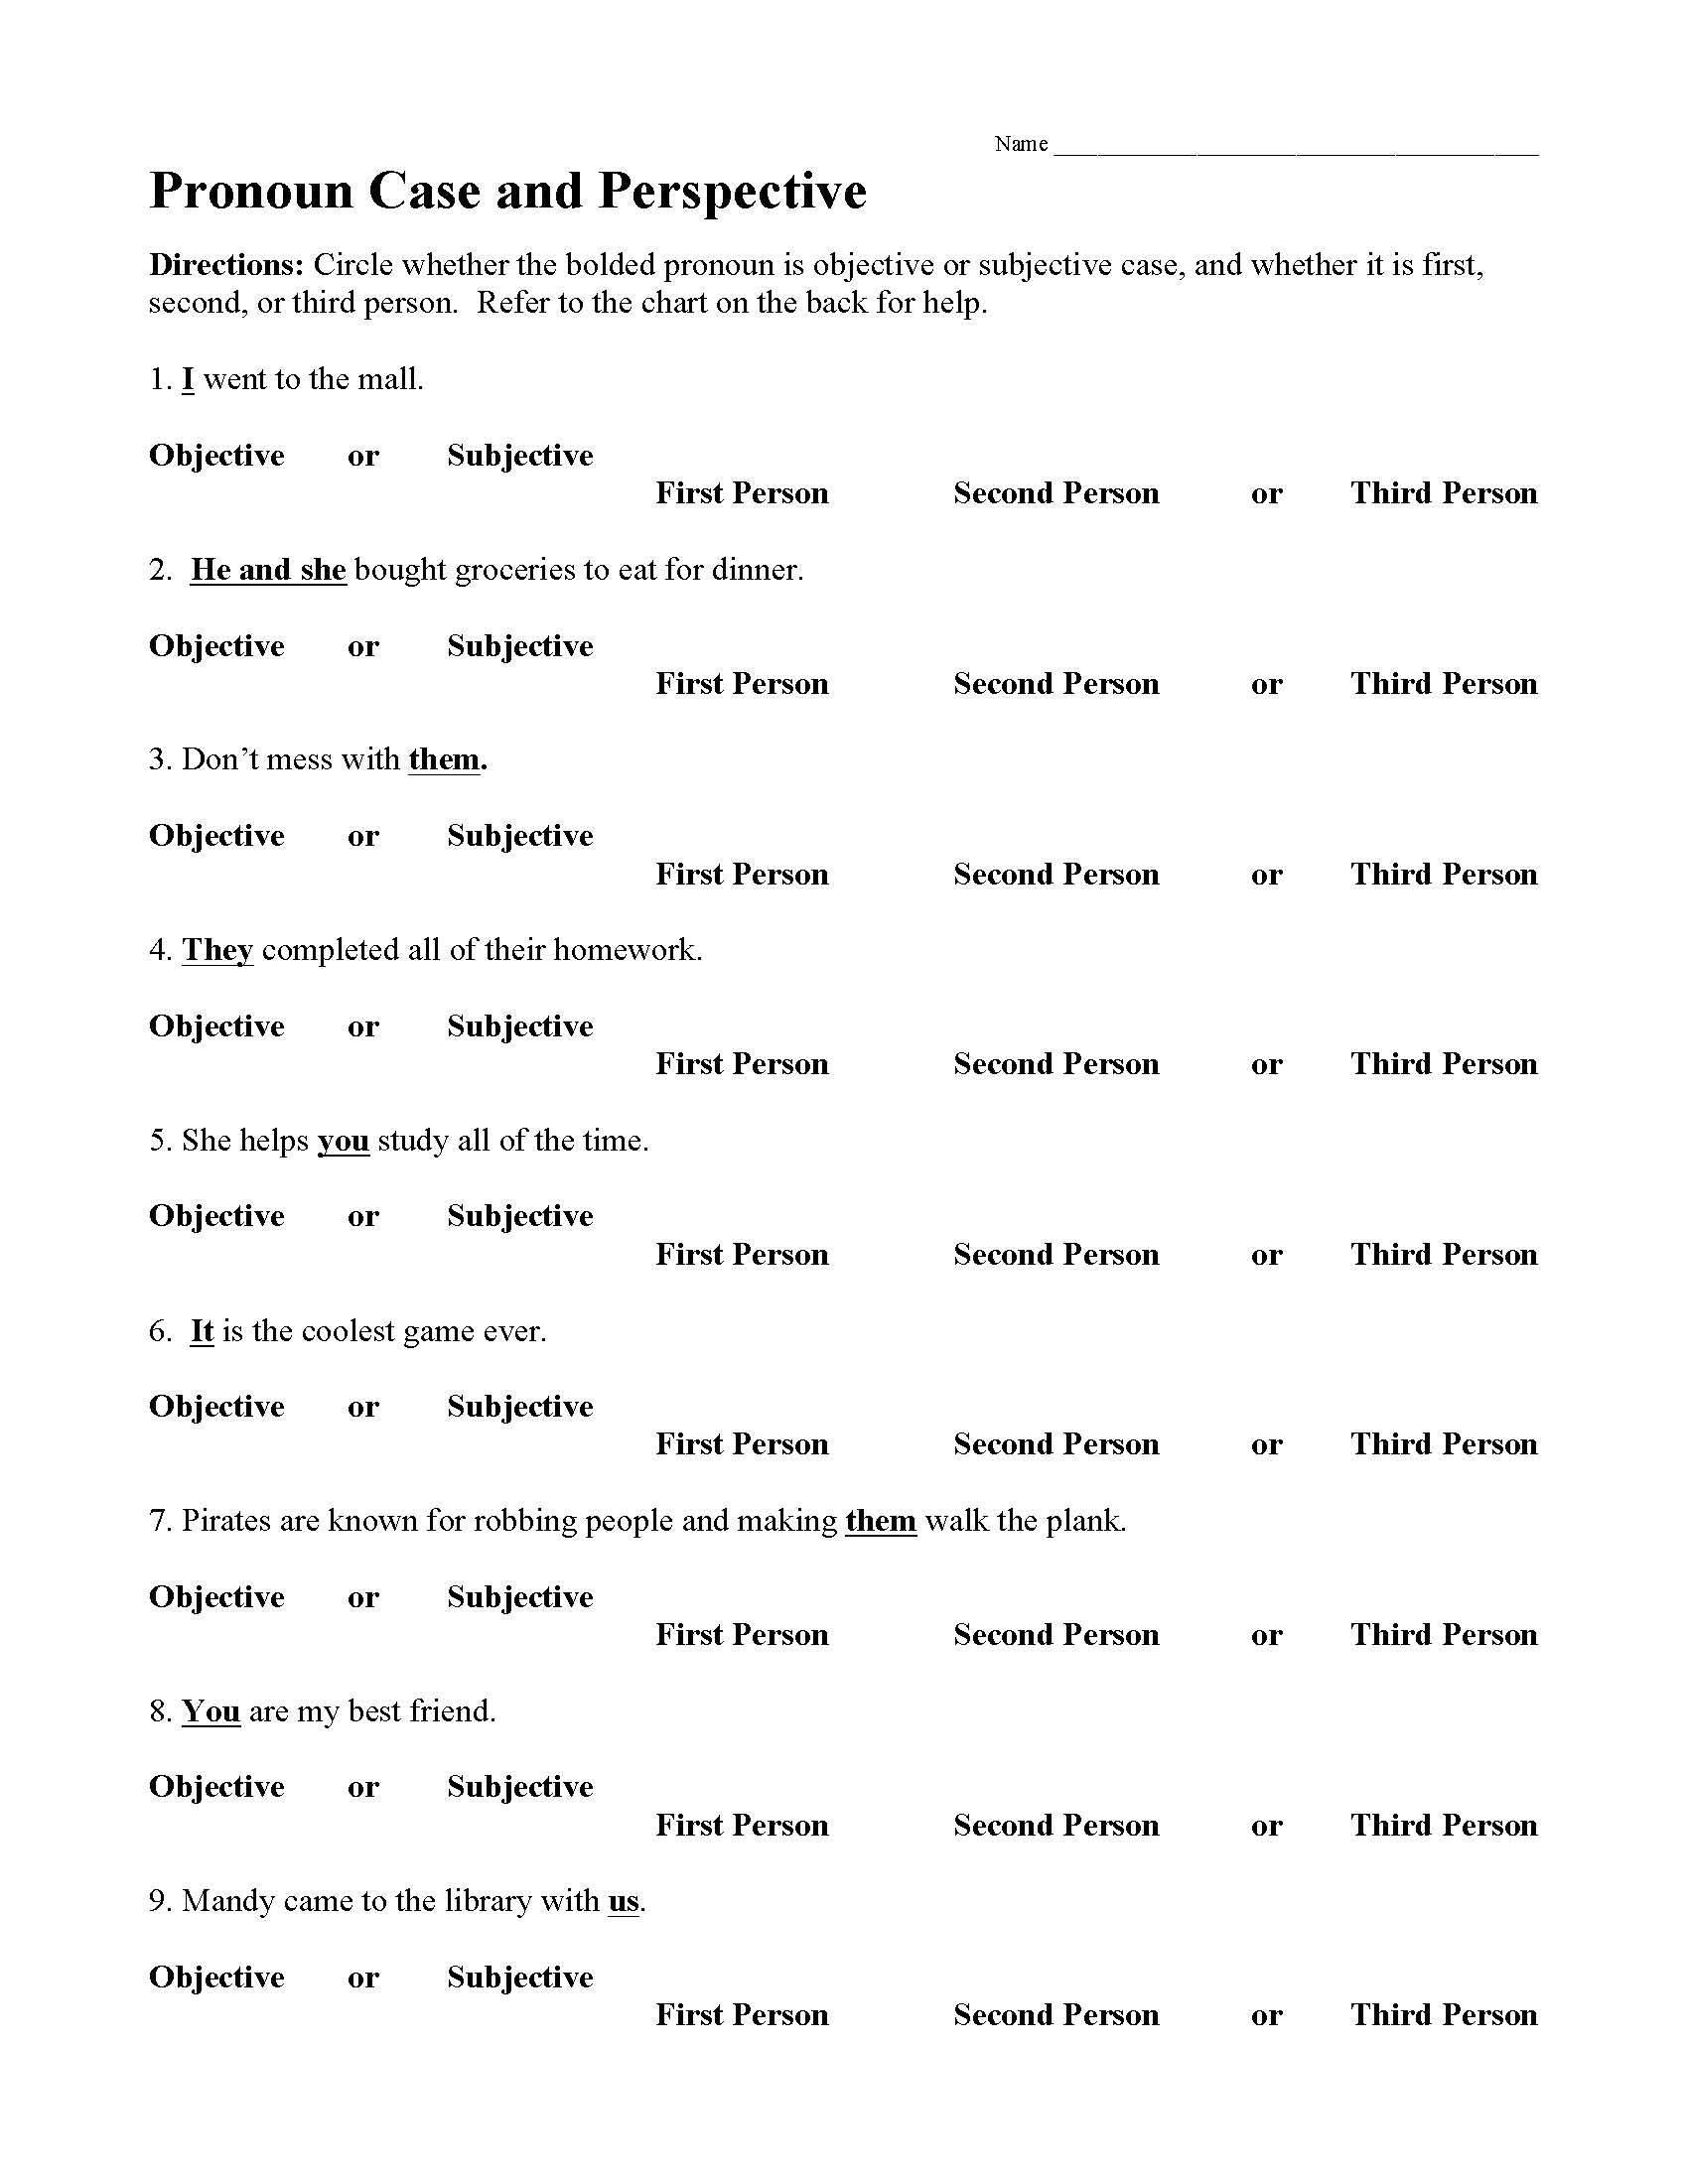 This is a preview image of the Pronoun Case and Perspective Worksheet .